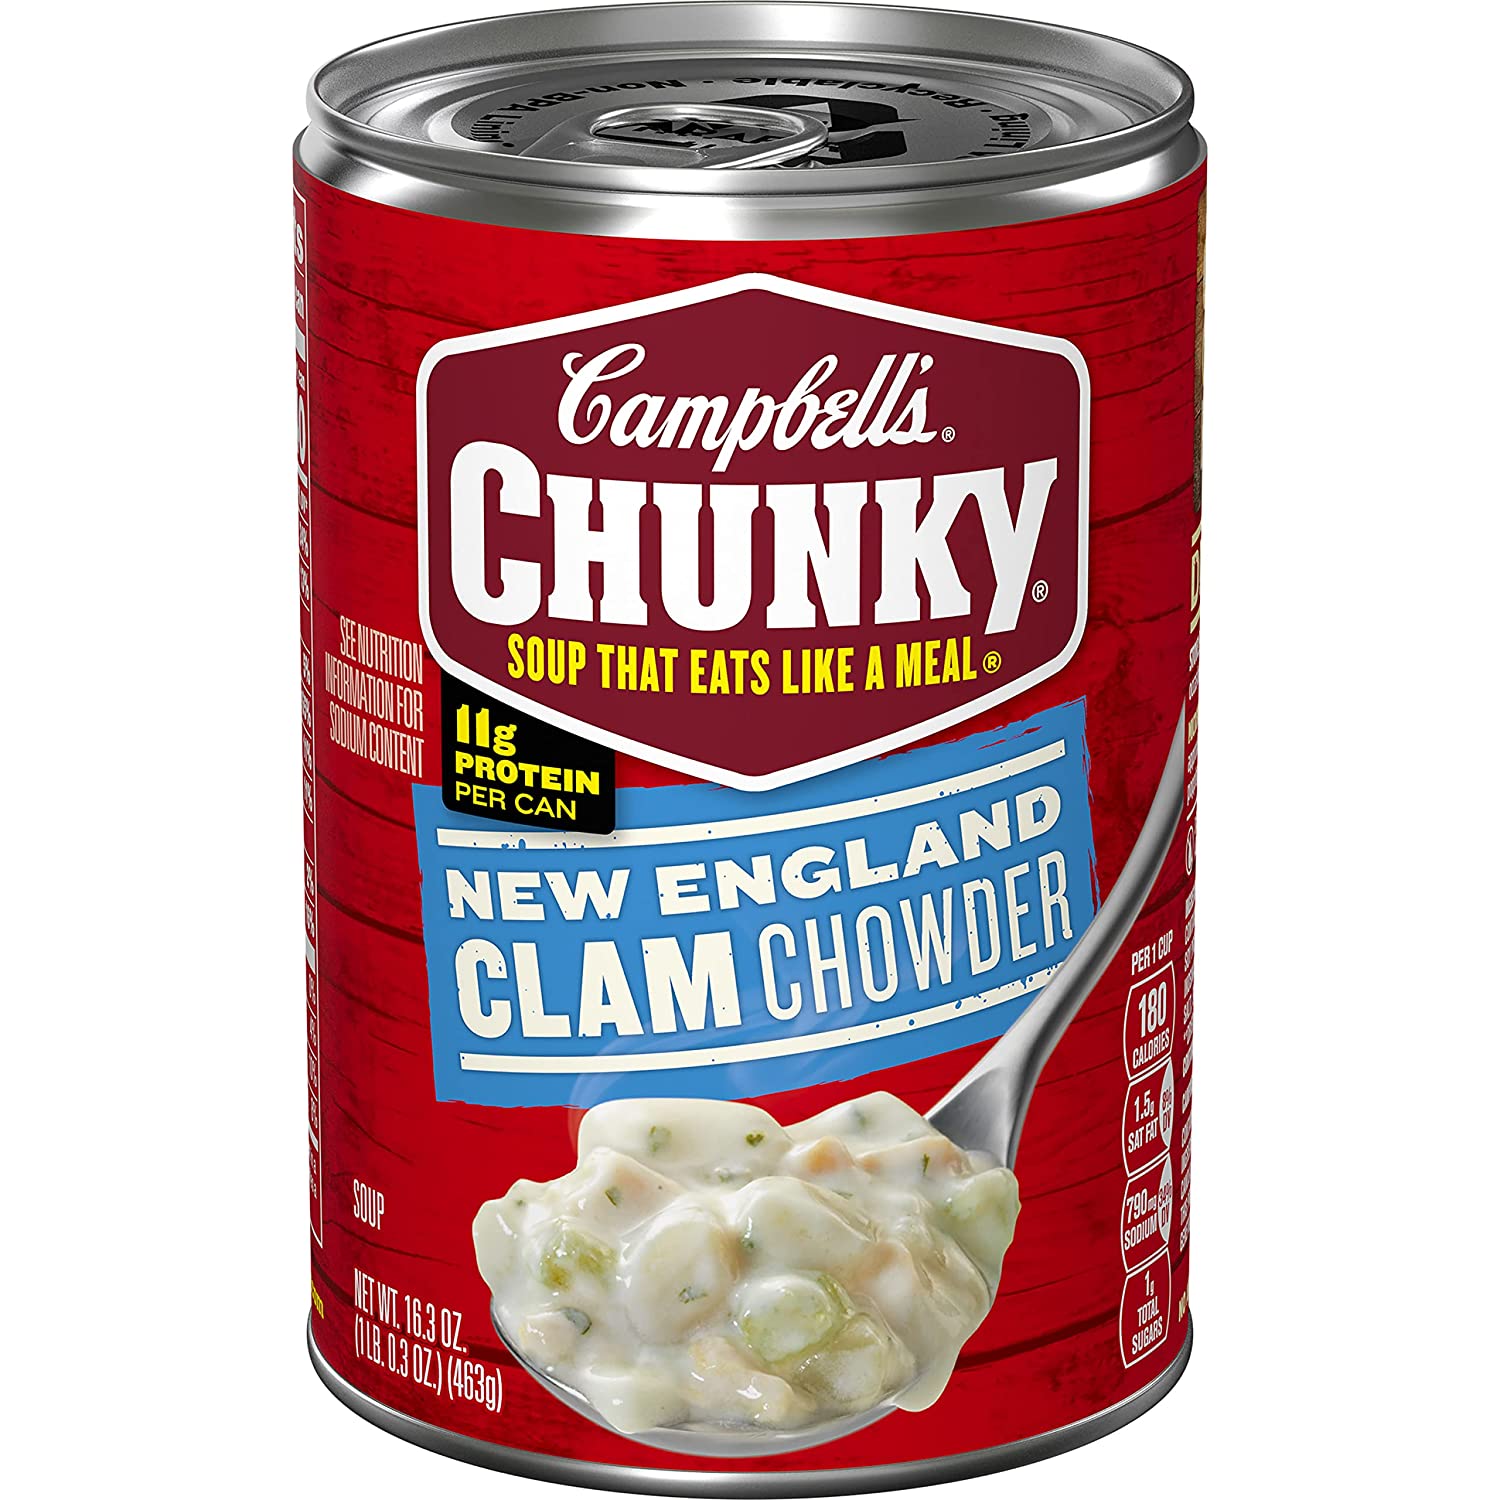 8-pack Campbell’s Chunky Soup, New England Clam Chowder, 16.3 Oz Can - $11.76 AC + 5% S+S (Amazon)